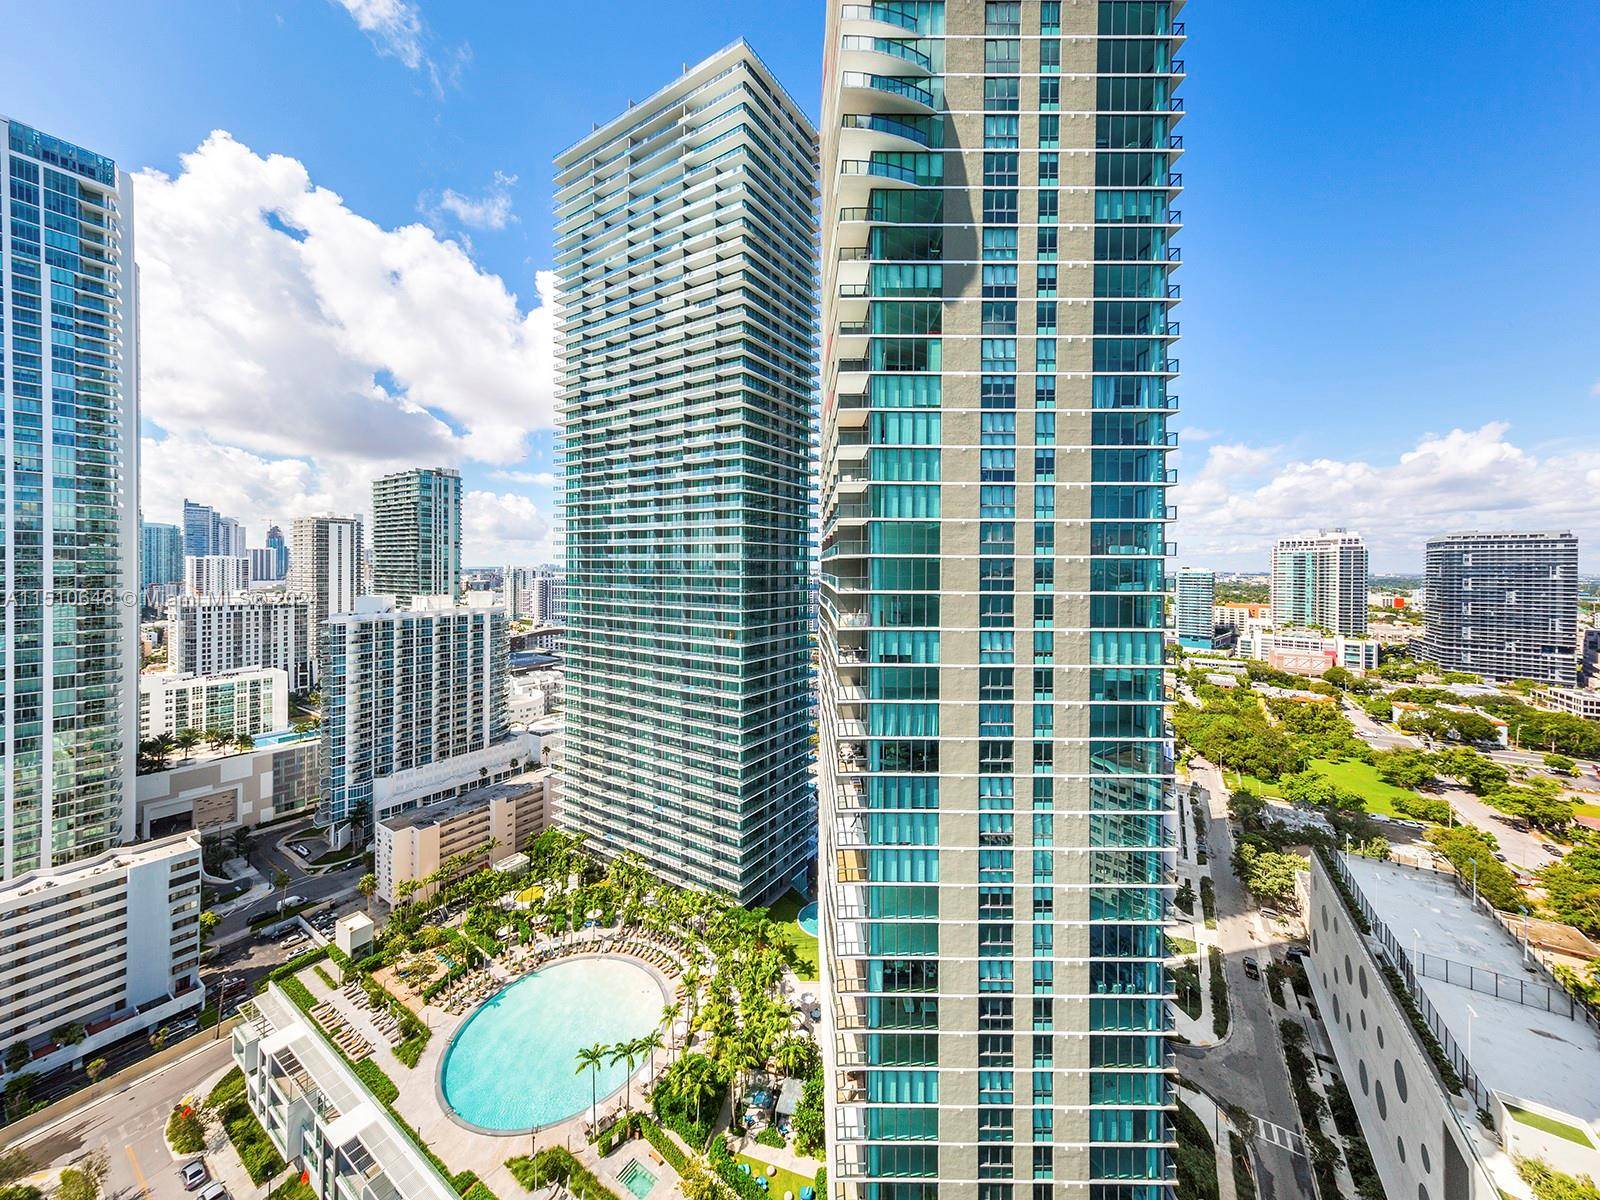 Private elevator foyer, Italian ceramic floors and breathtaking panoramic views of Biscayne Bay and Miami Beach in this spacious 1 bedroom, 1.